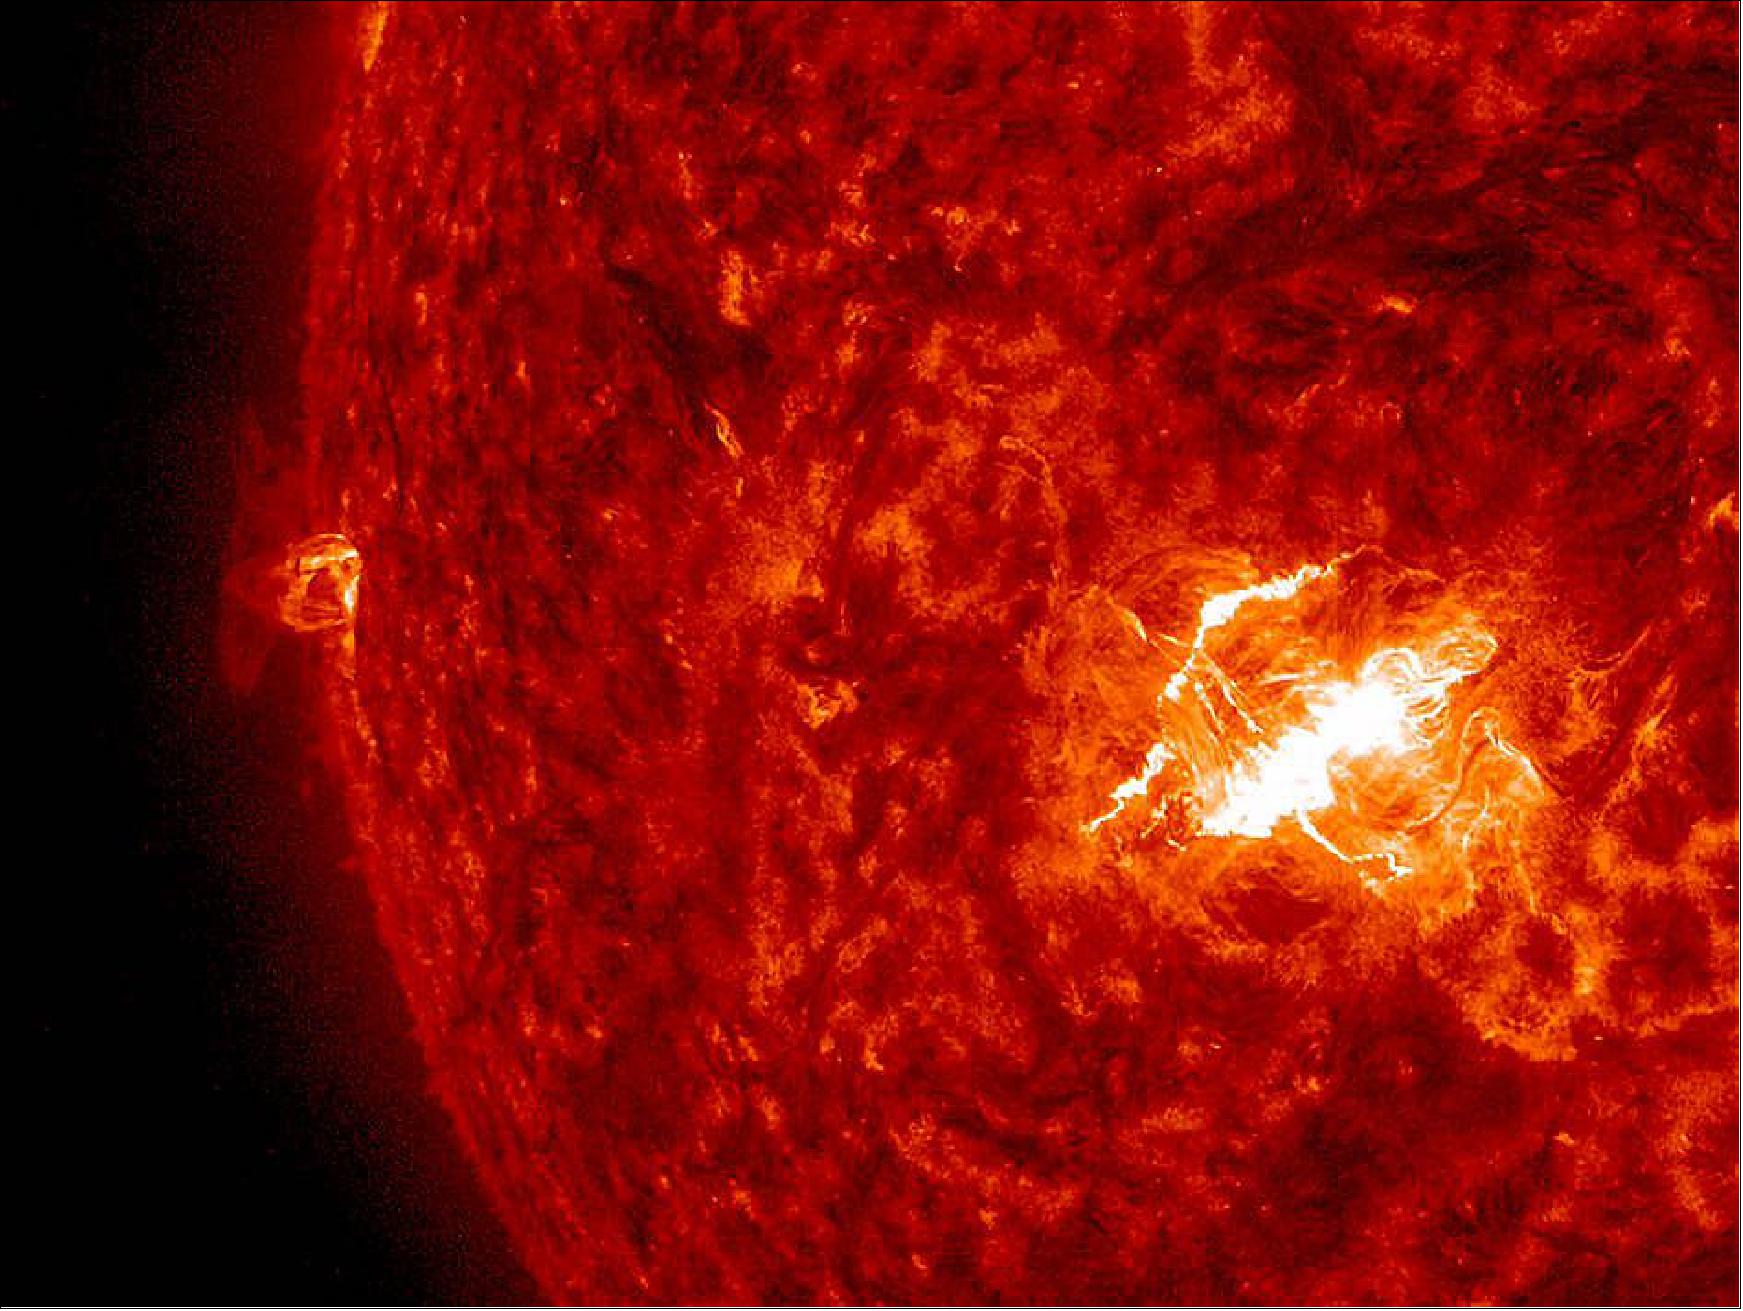 Figure 20: A strong flare X2-class flare erupted on March 11, 2015 into space from an active region that was roughly facing towards Earth (image credit: NASA)